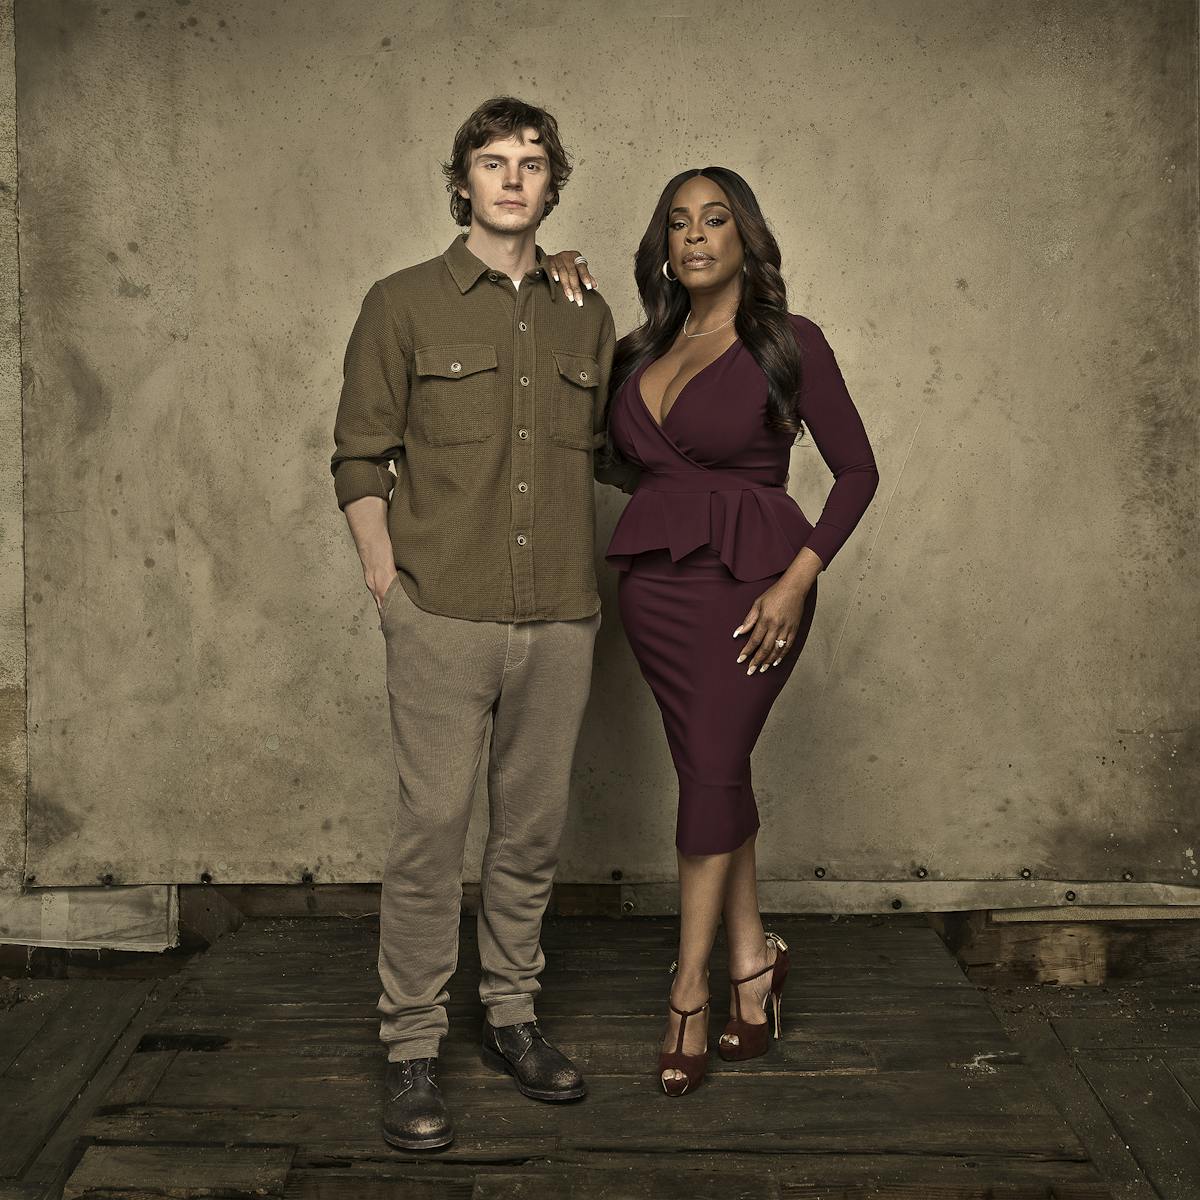 Evan Peters and Niecy Nash-Betts stand in a deserted looking area.